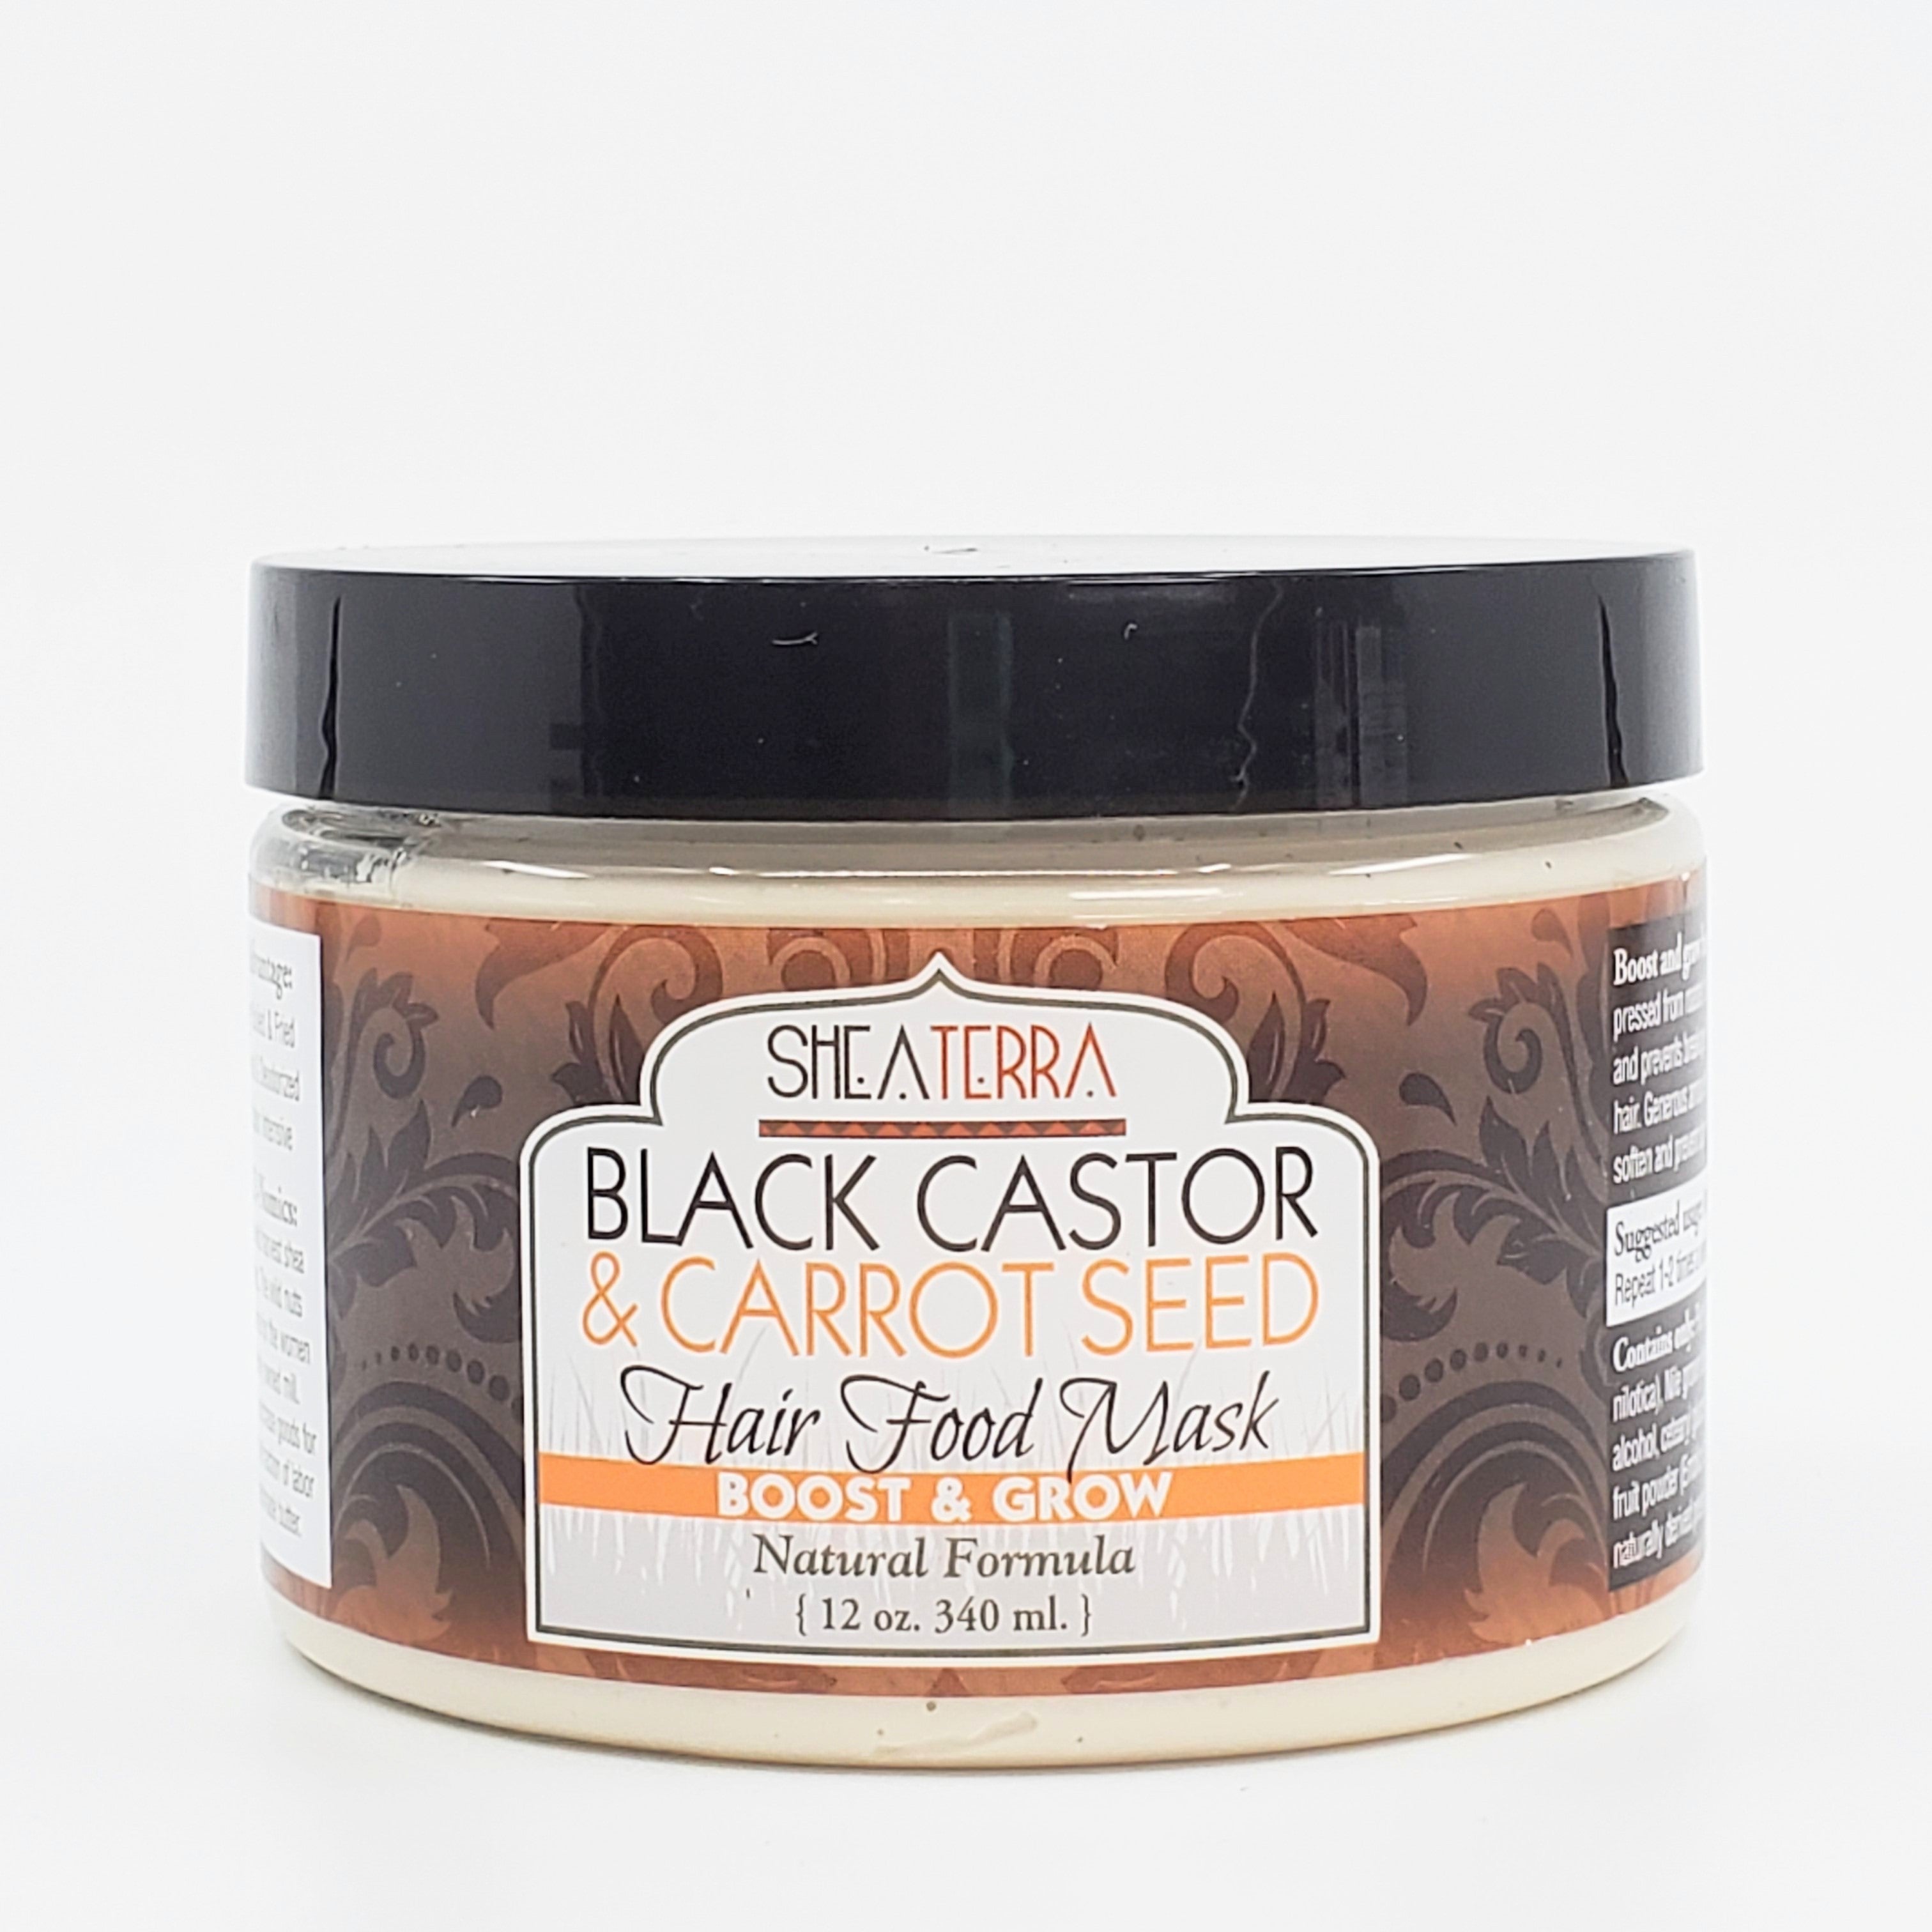 Black Castor and Carrot Seed Hair Food Mask - The Mockingbird Apothecary & General Store